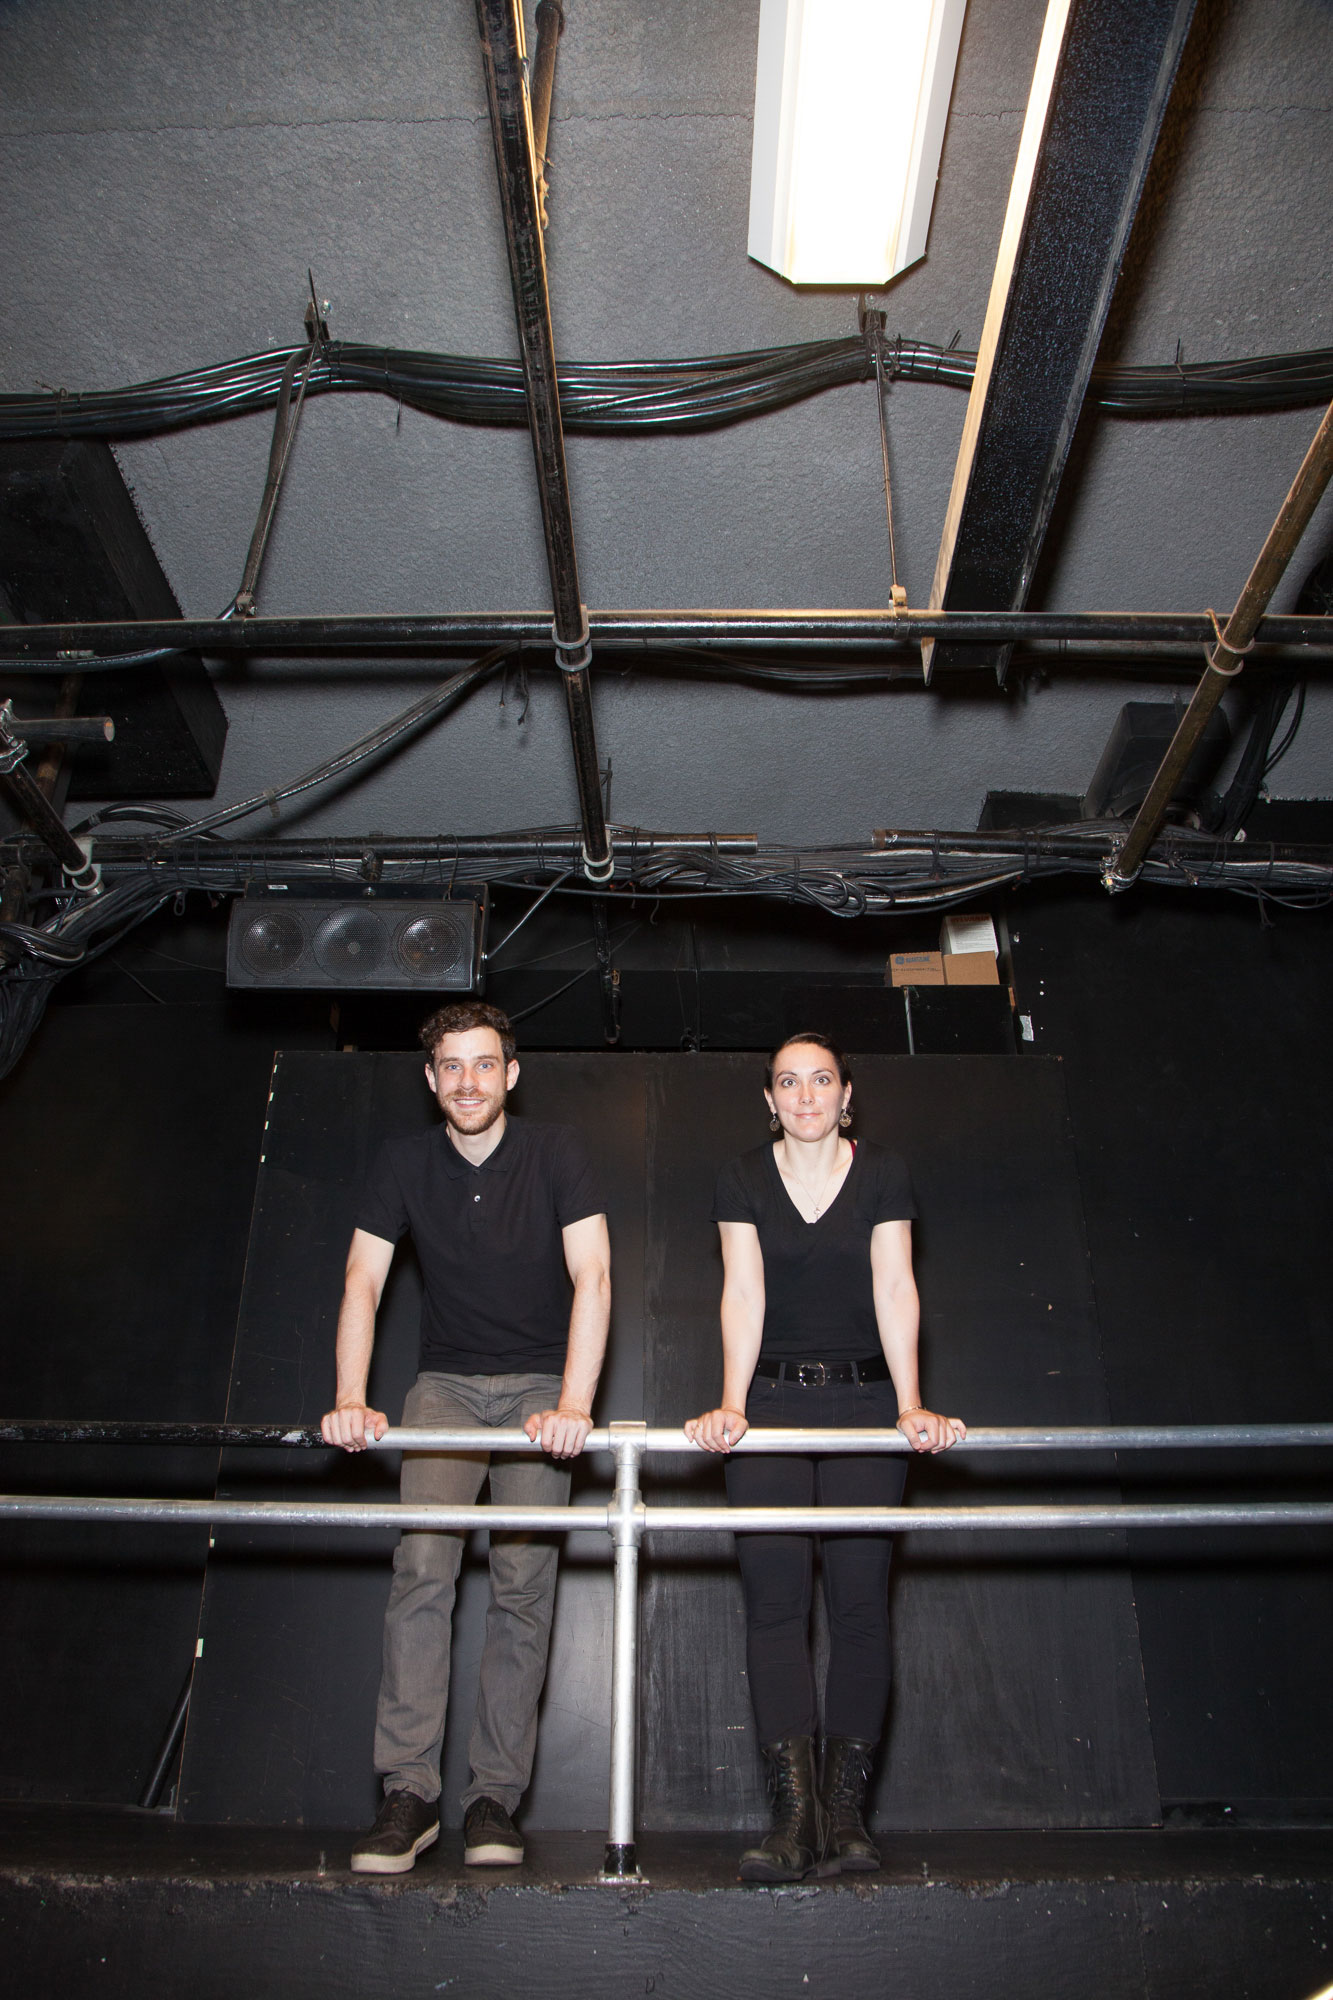 Tim Love and Kelly Ice leaning against scaffolding backstage, photo by Michael Lavine